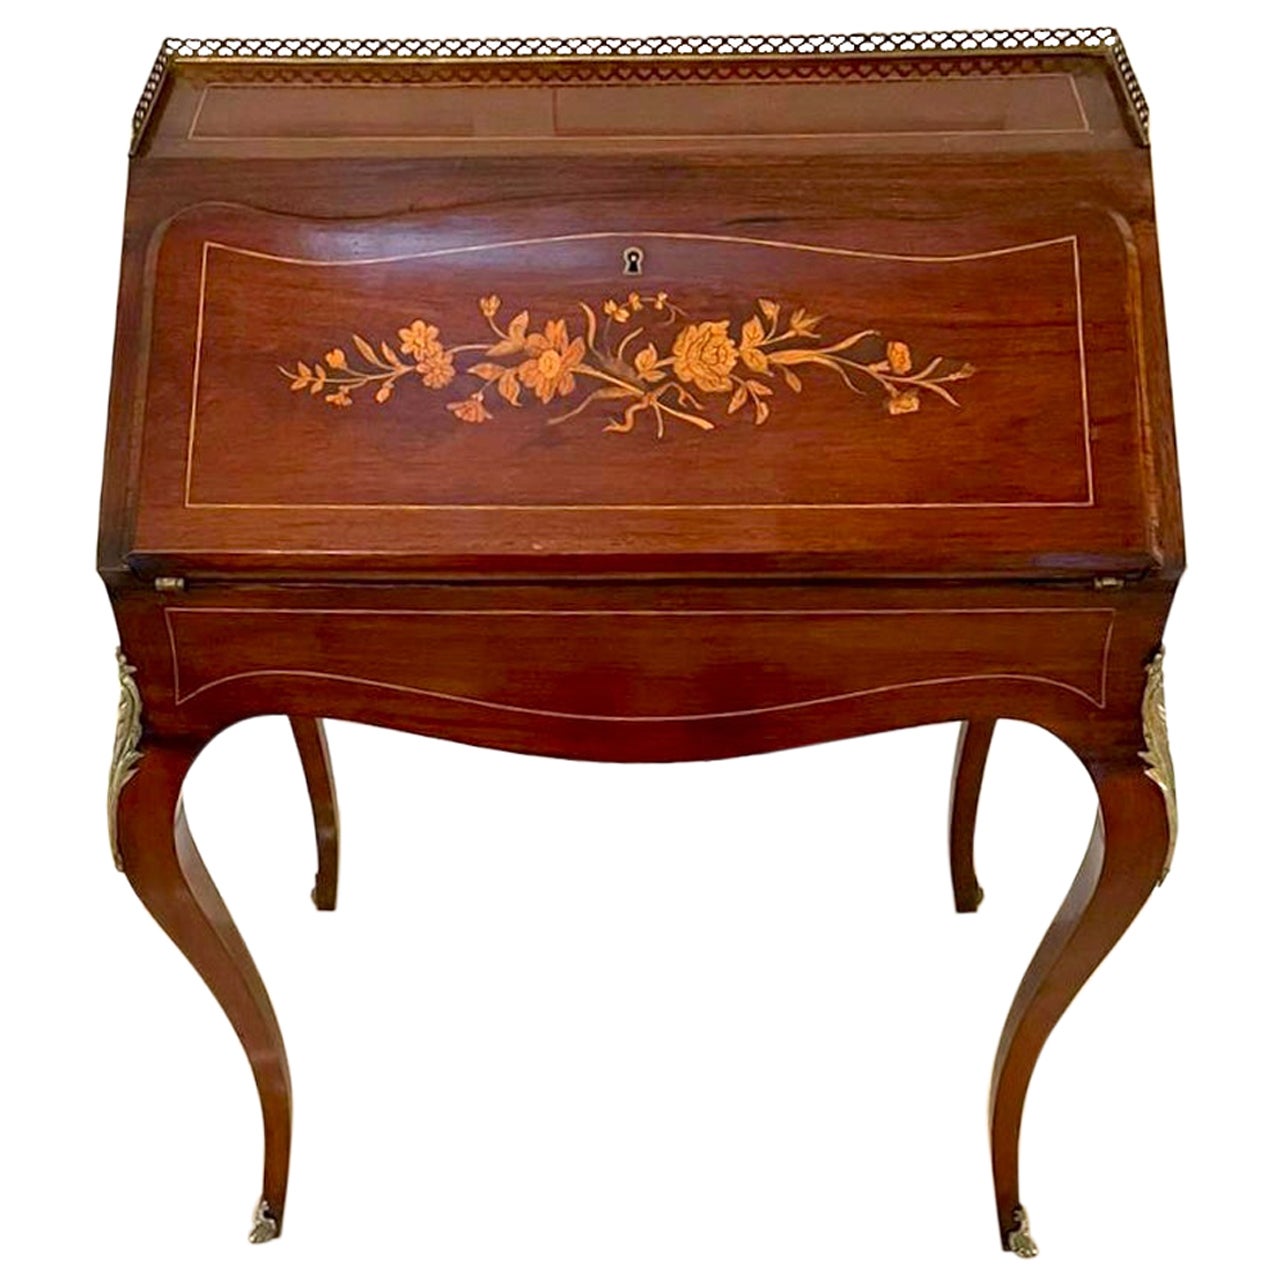  Antique Victorian French Inlaid Rosewood Freestanding Bureau/Desk For Sale